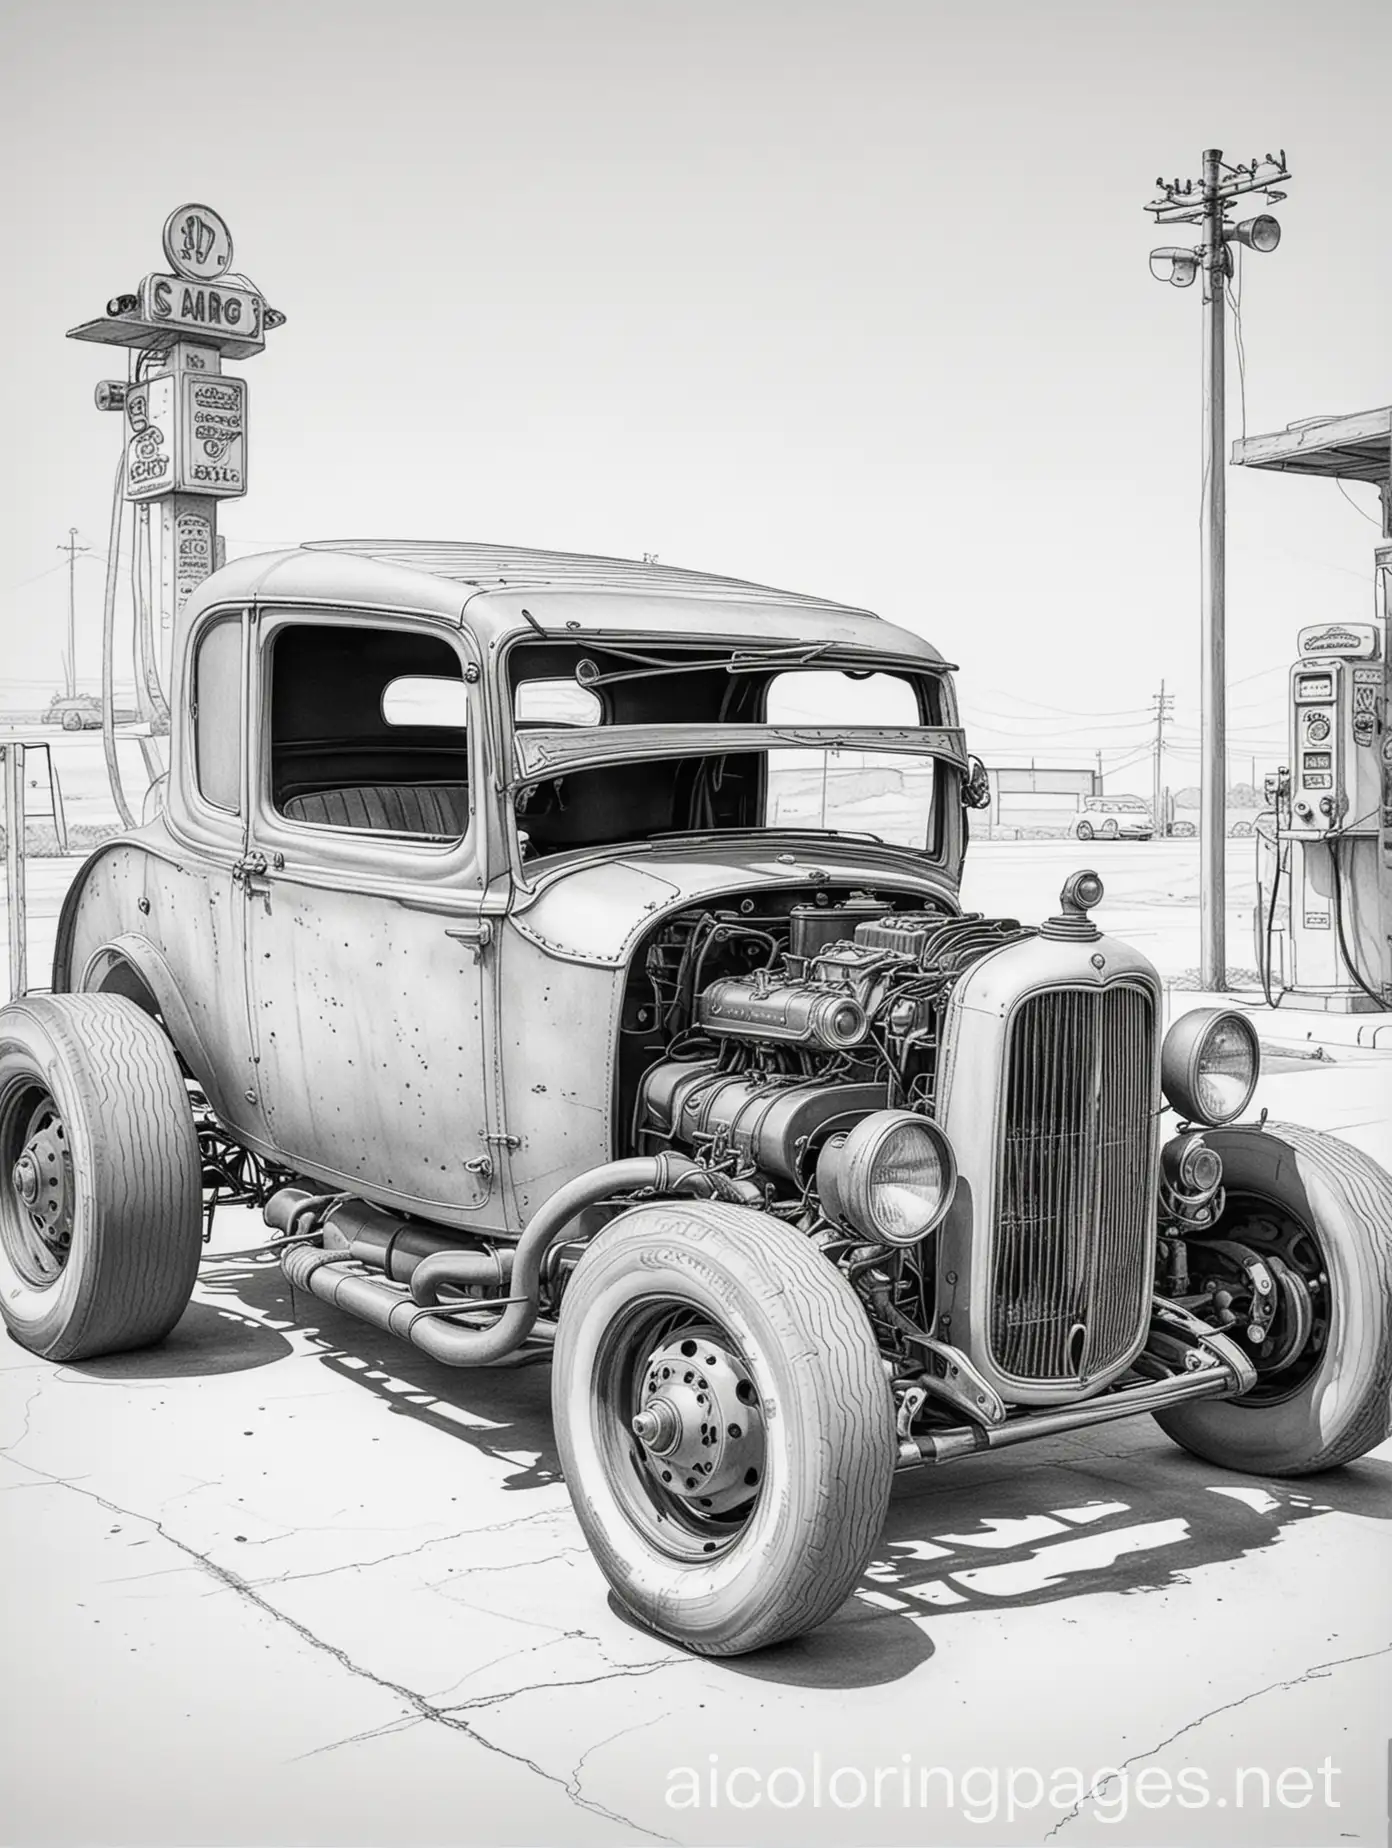 rat rod car at gas station, Coloring Page, black and white, line art, white background, Simplicity, Ample White Space. The background of the coloring page is plain white to make it easy for young children to color within the lines. The outlines of all the subjects are easy to distinguish, making it simple for kids to color without too much difficulty